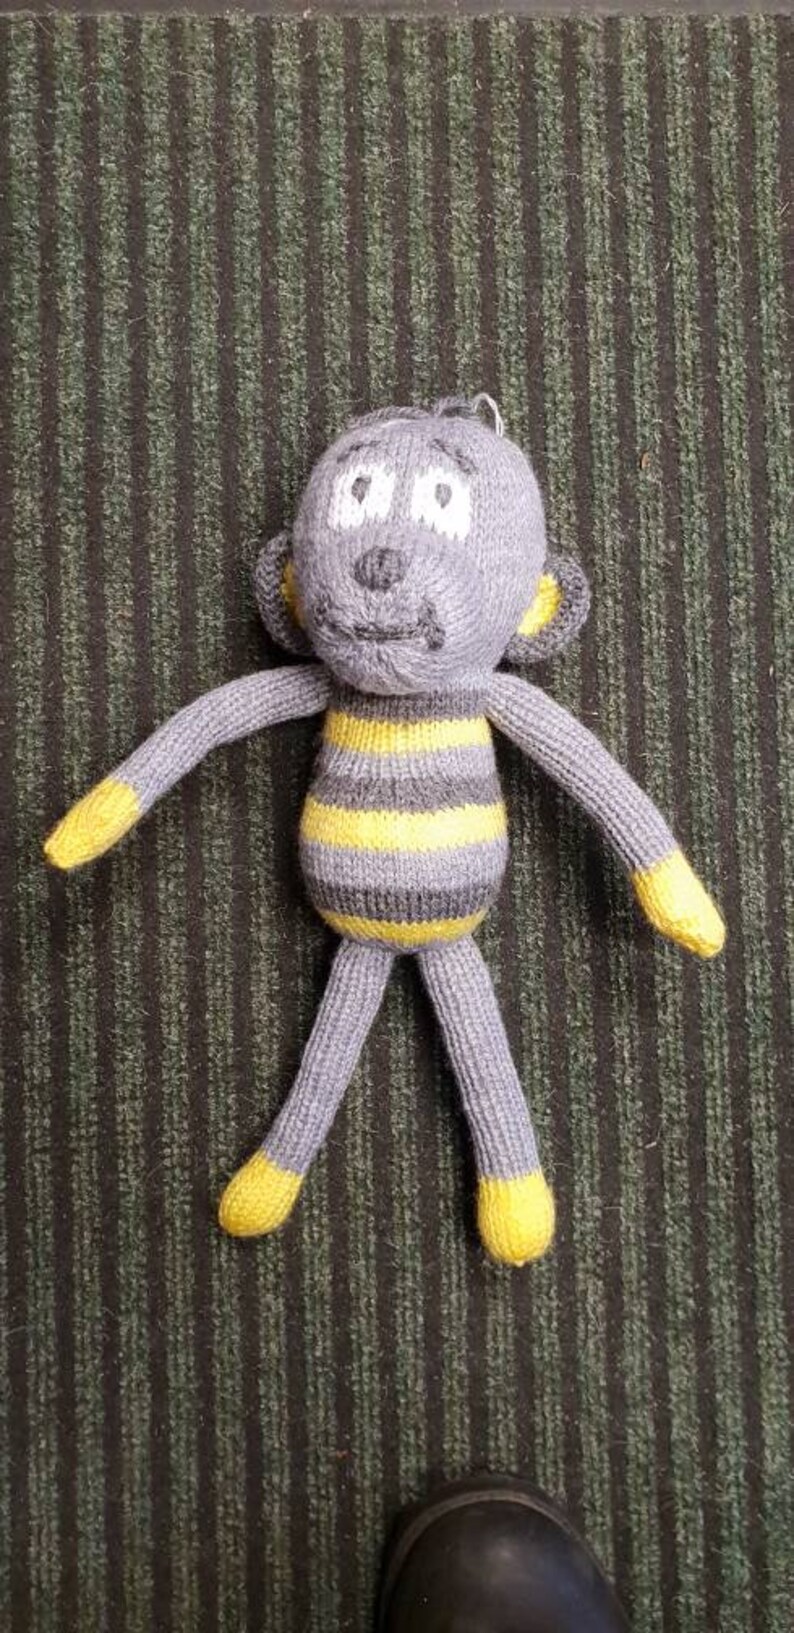 Hand knitted cheeky monkey cuddly toy